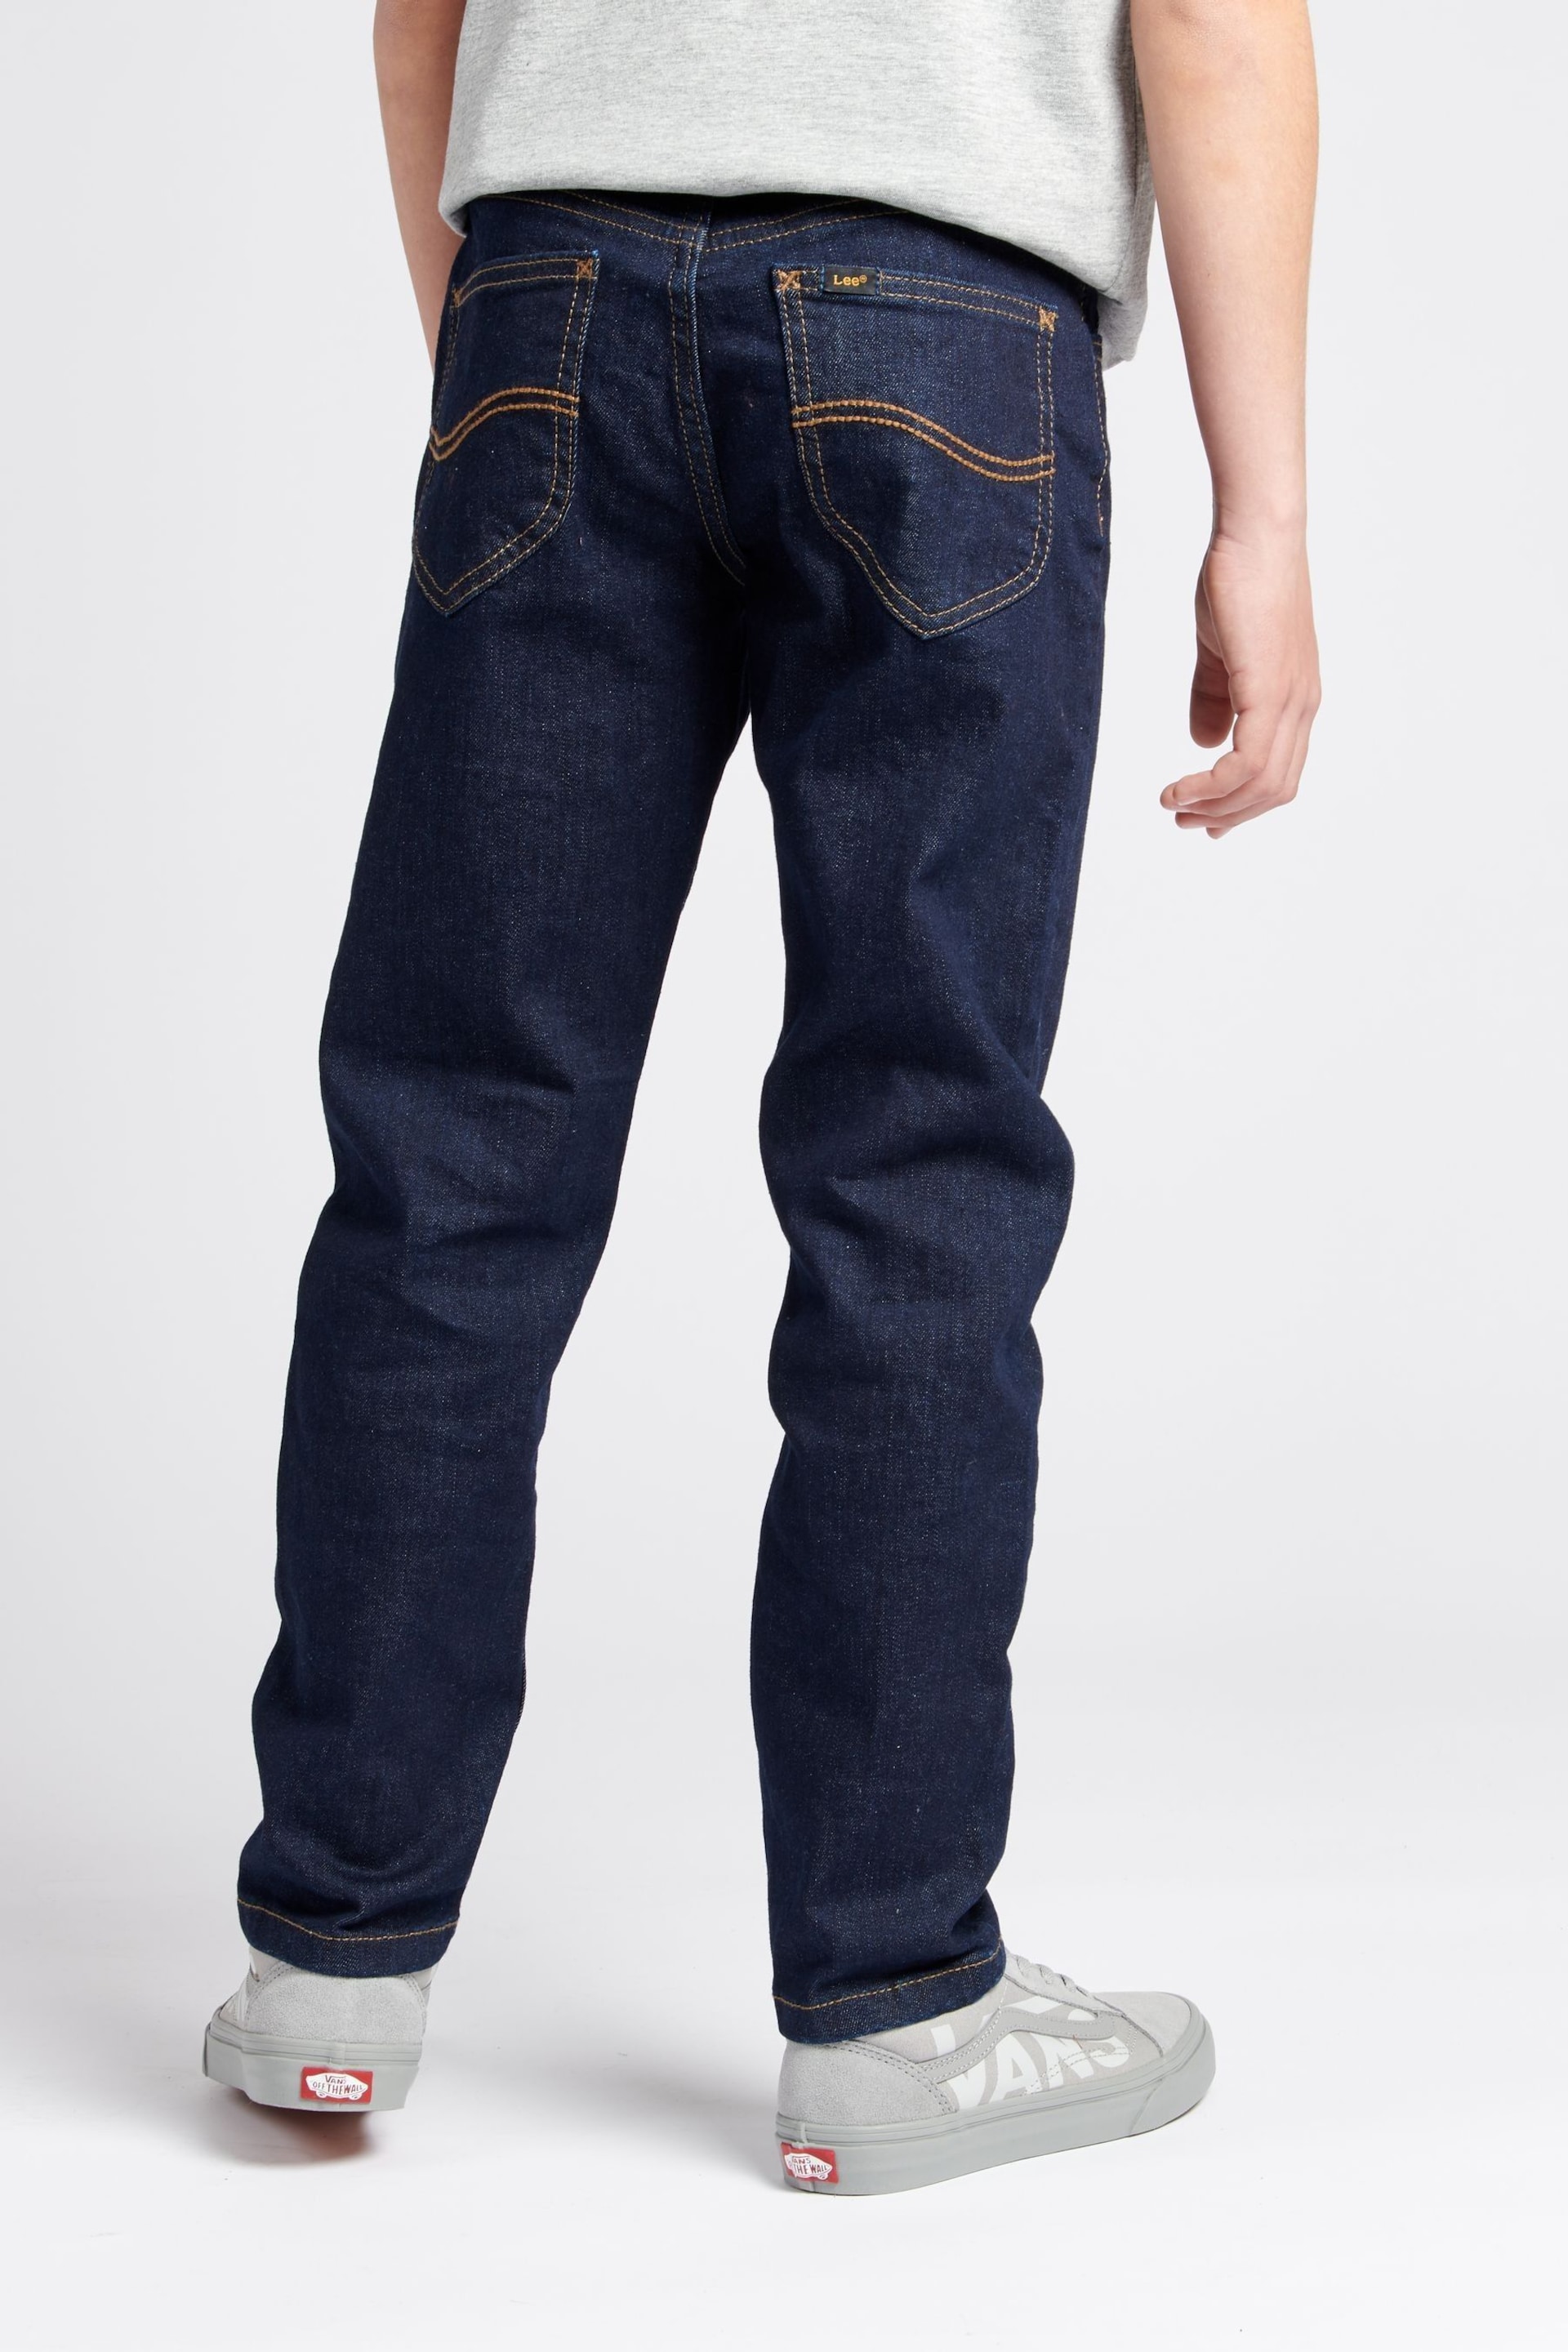 Lee Boys Daren Straight Fit Jeans - Image 2 of 7